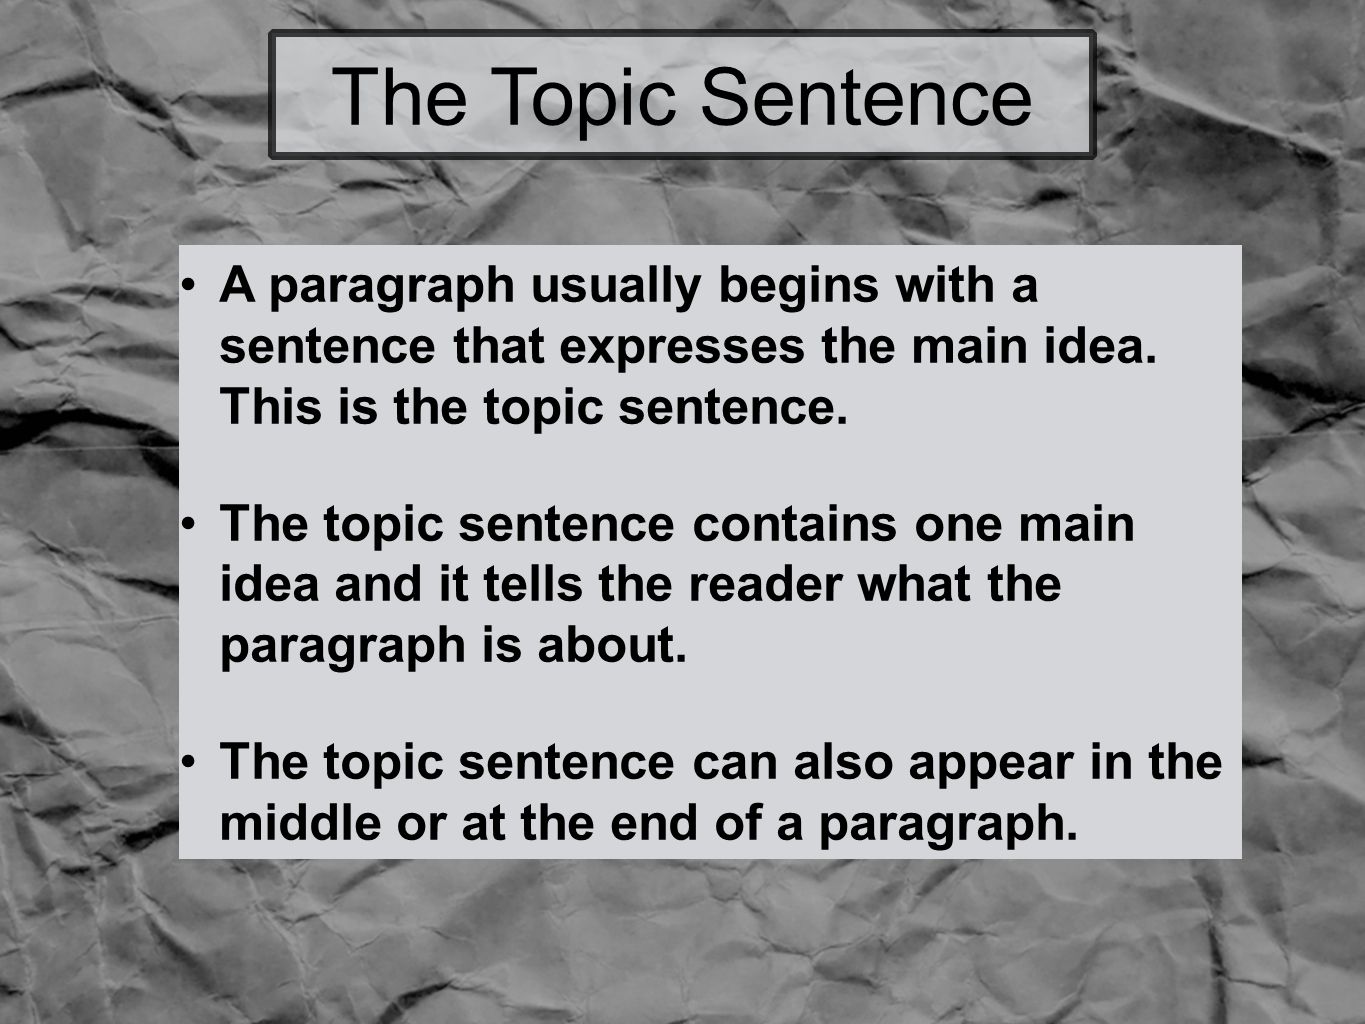 The Topic Sentence A paragraph usually begins with a sentence that expresses the main idea.